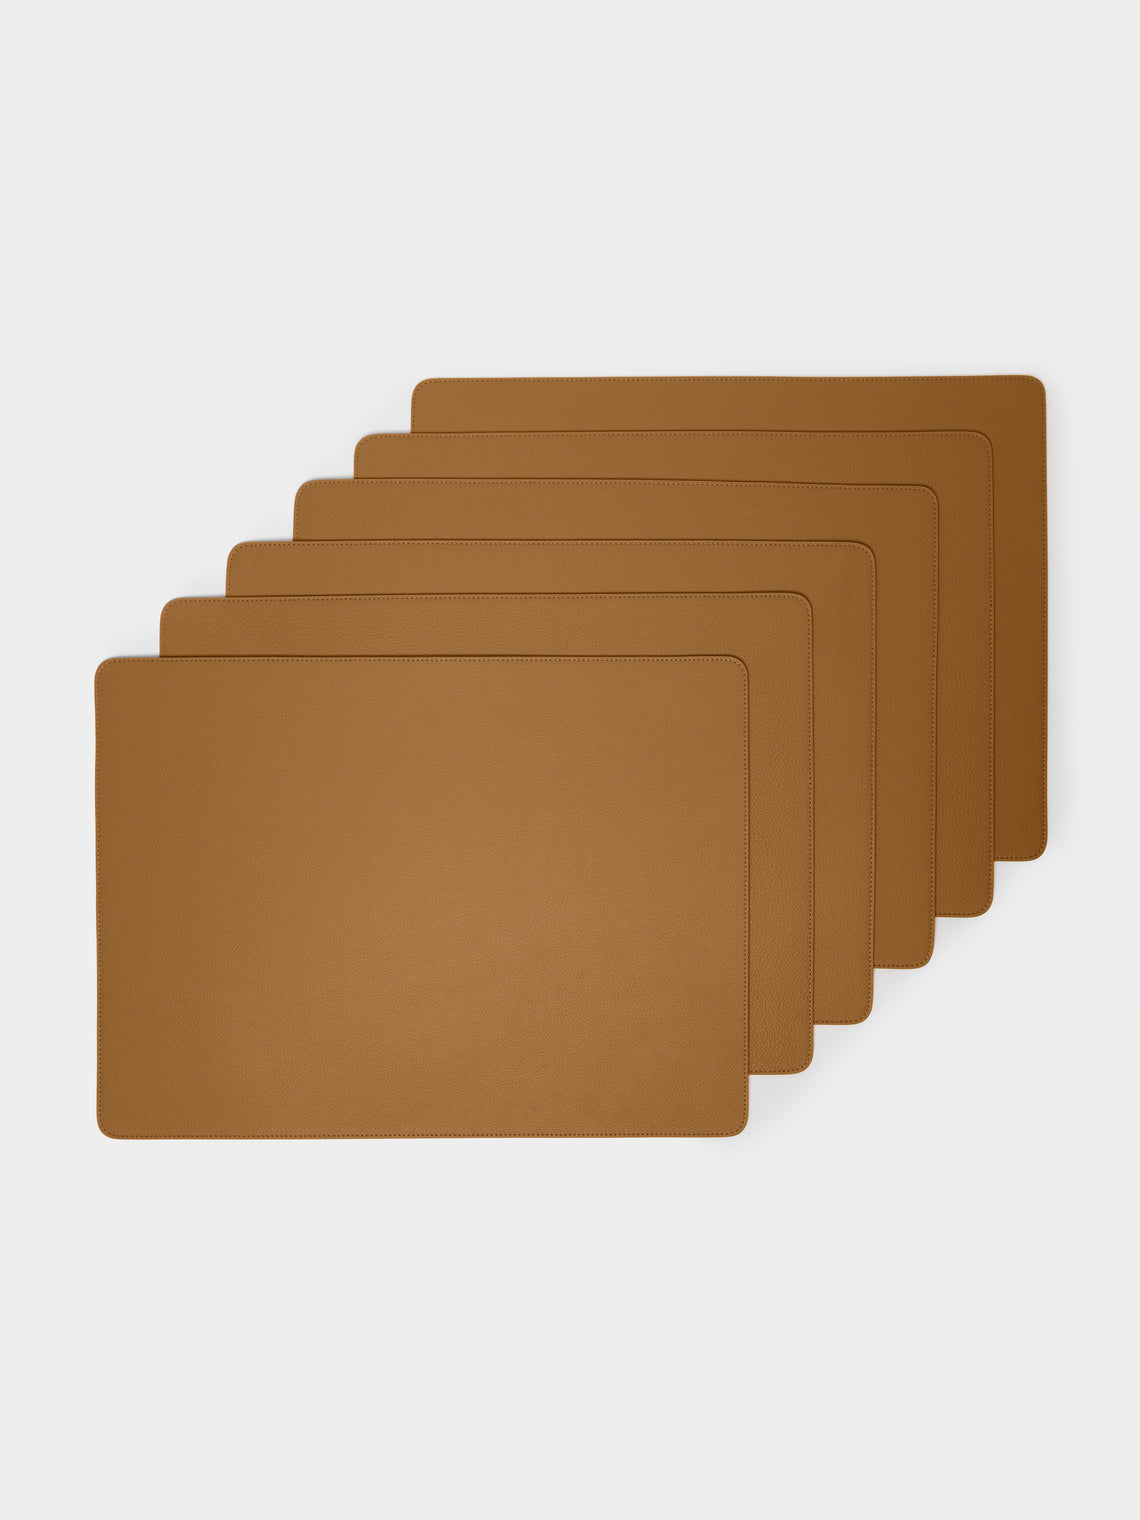 Giobagnara x Poltrona Frau - Leather and Walnut Placemats with Holder (Set of 6) -  - ABASK